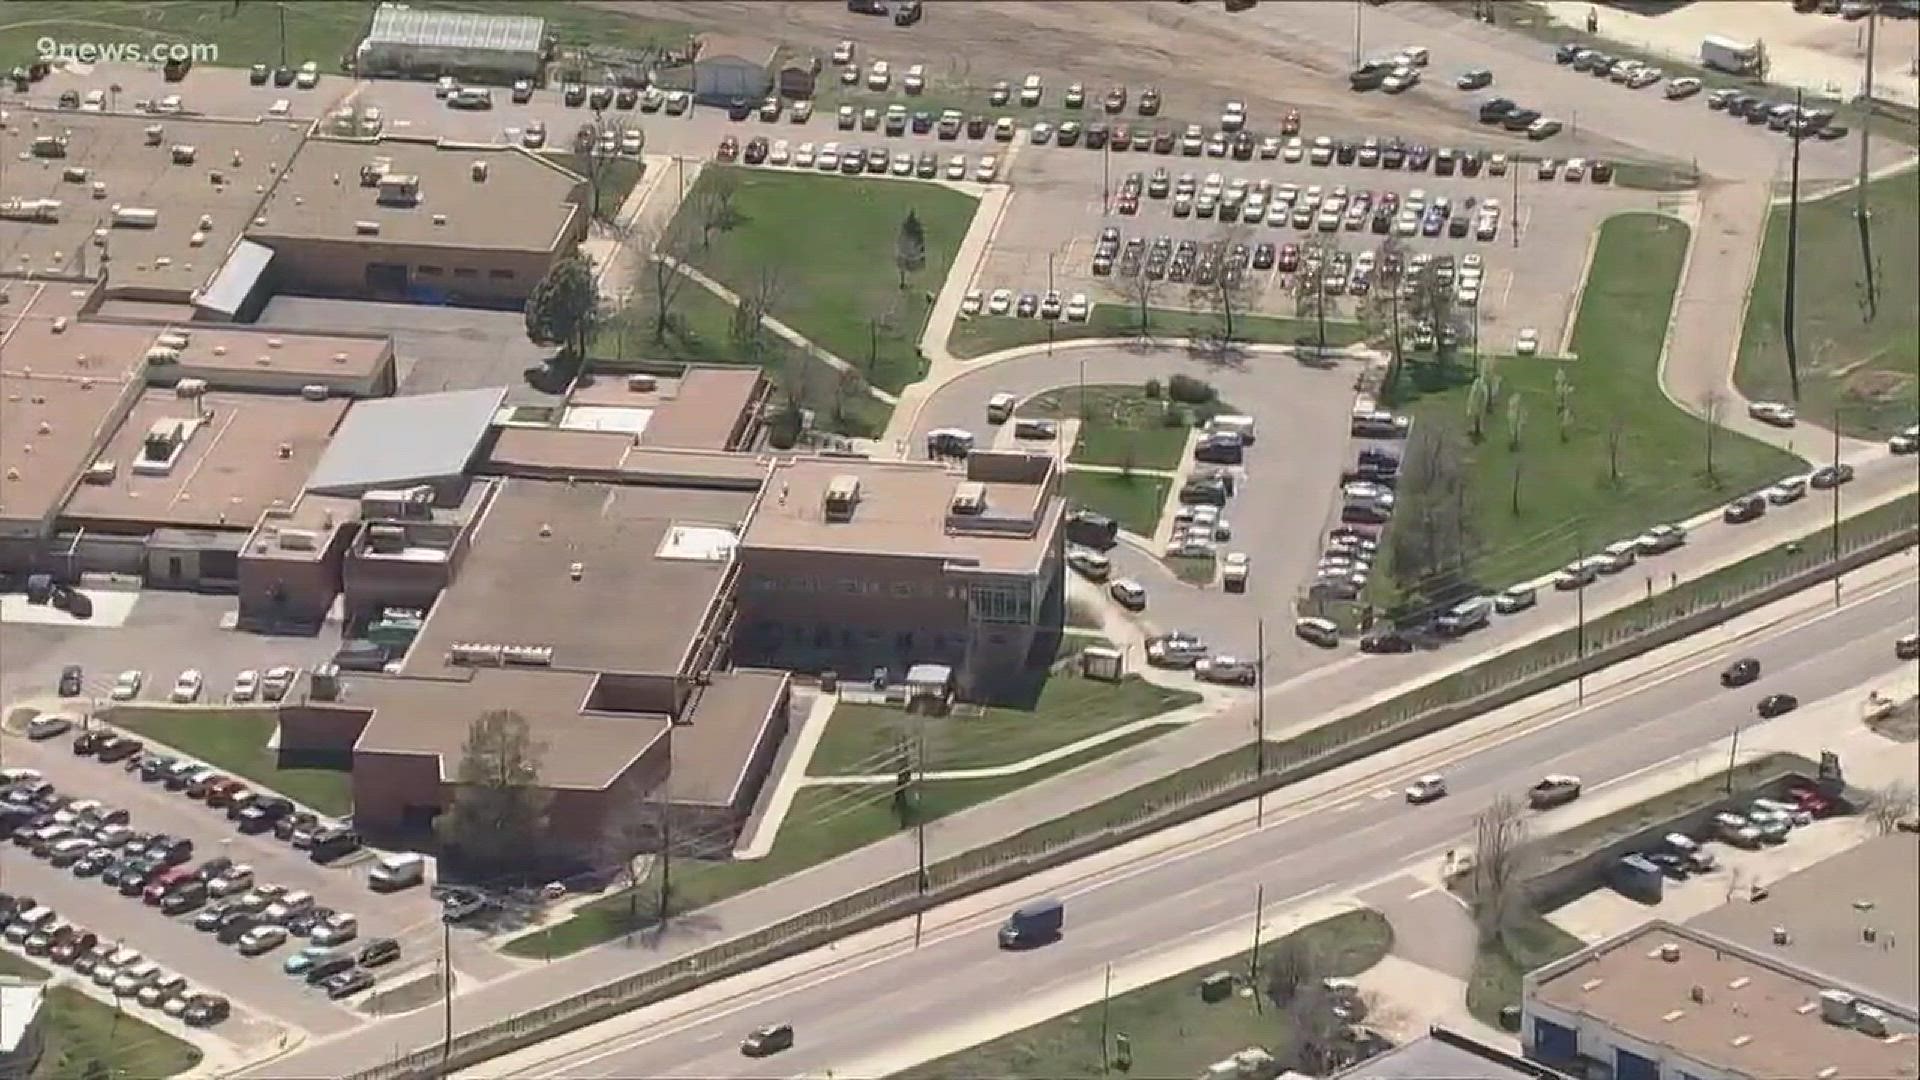 The school was on lockdown as the Boulder County Sheriff’s Office investigated a Safe2Tell tip of a person with a weapon. After a search of the building, deputies determined there was no threat.